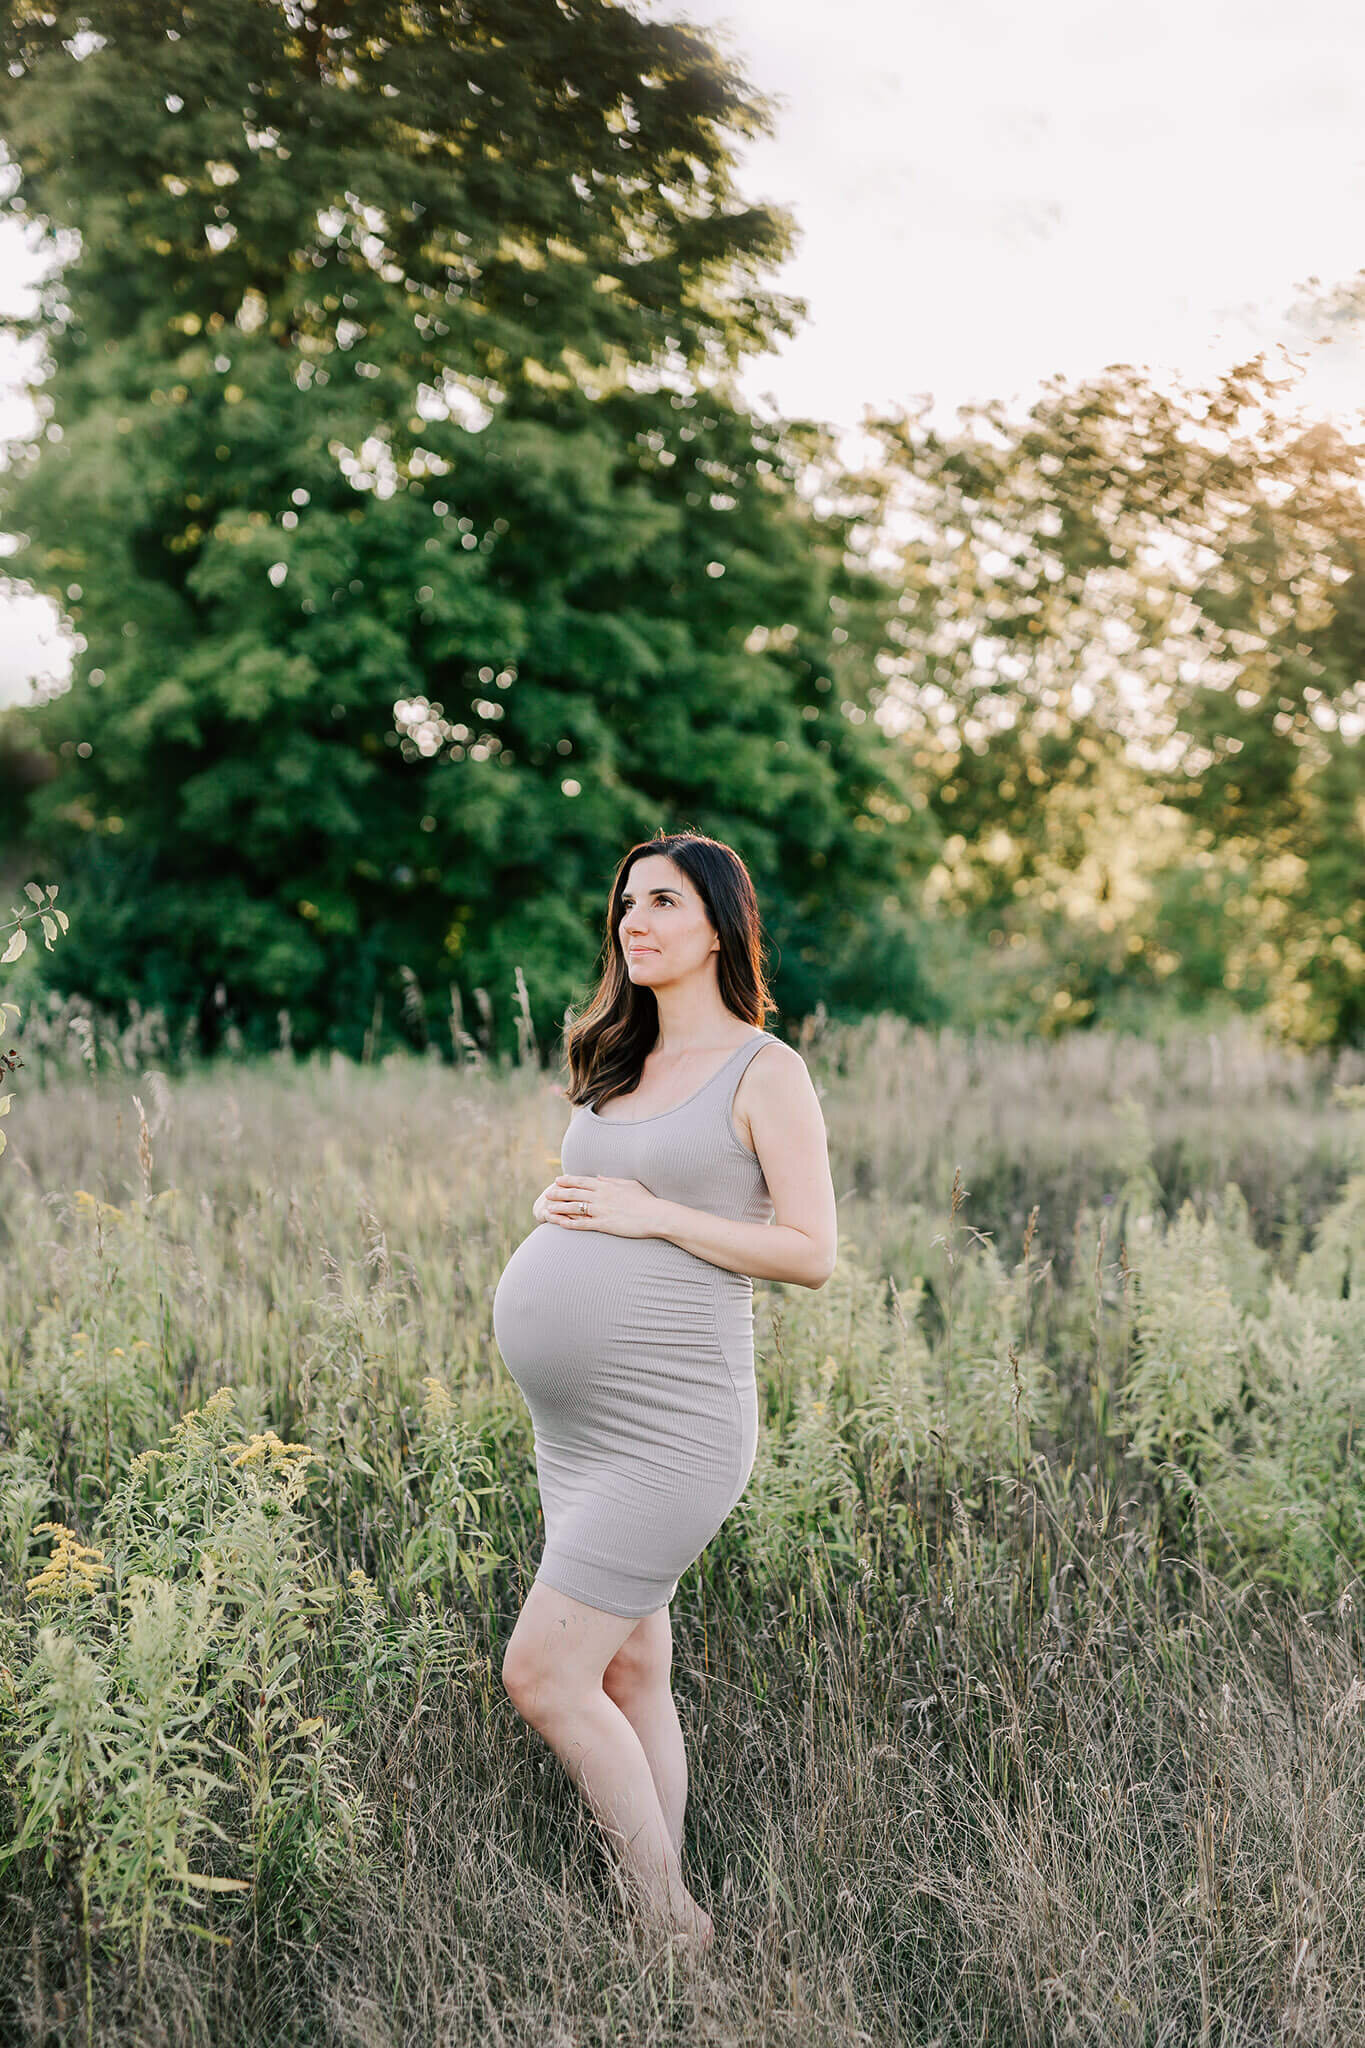 Expecting mother is photographed in a beautiful grassy field in September.